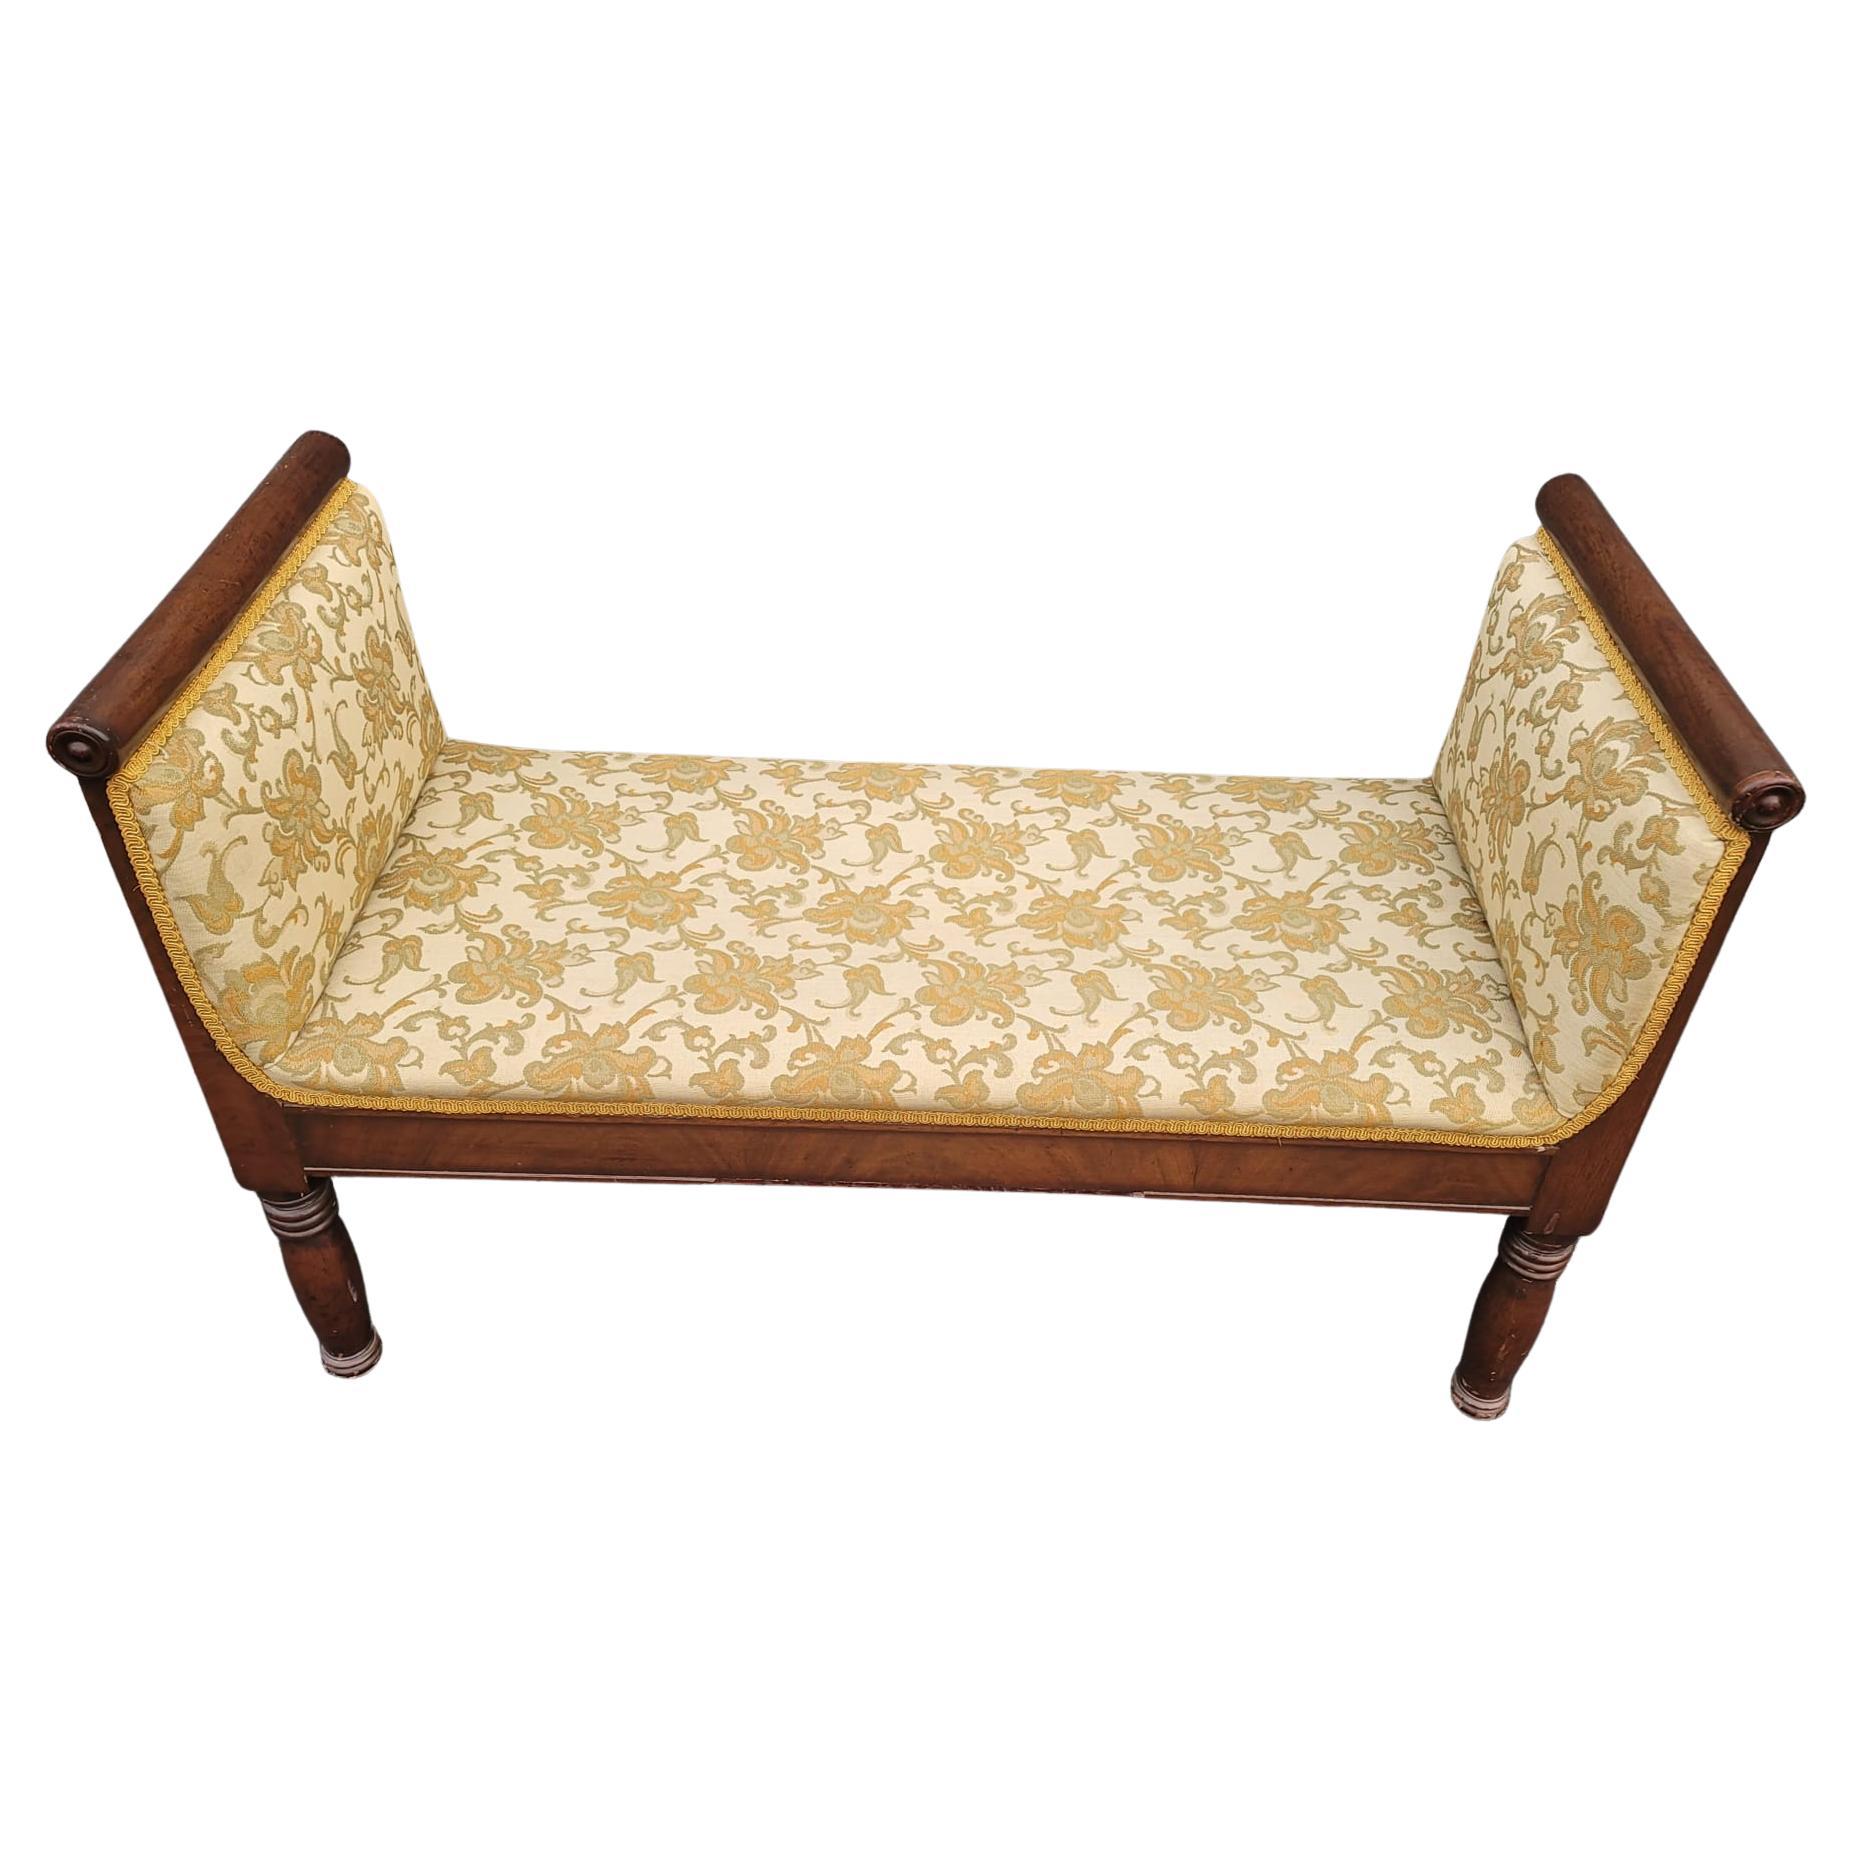 Upholstery Late 19th Century Federal Walnut And Upholstered Window Bench For Sale